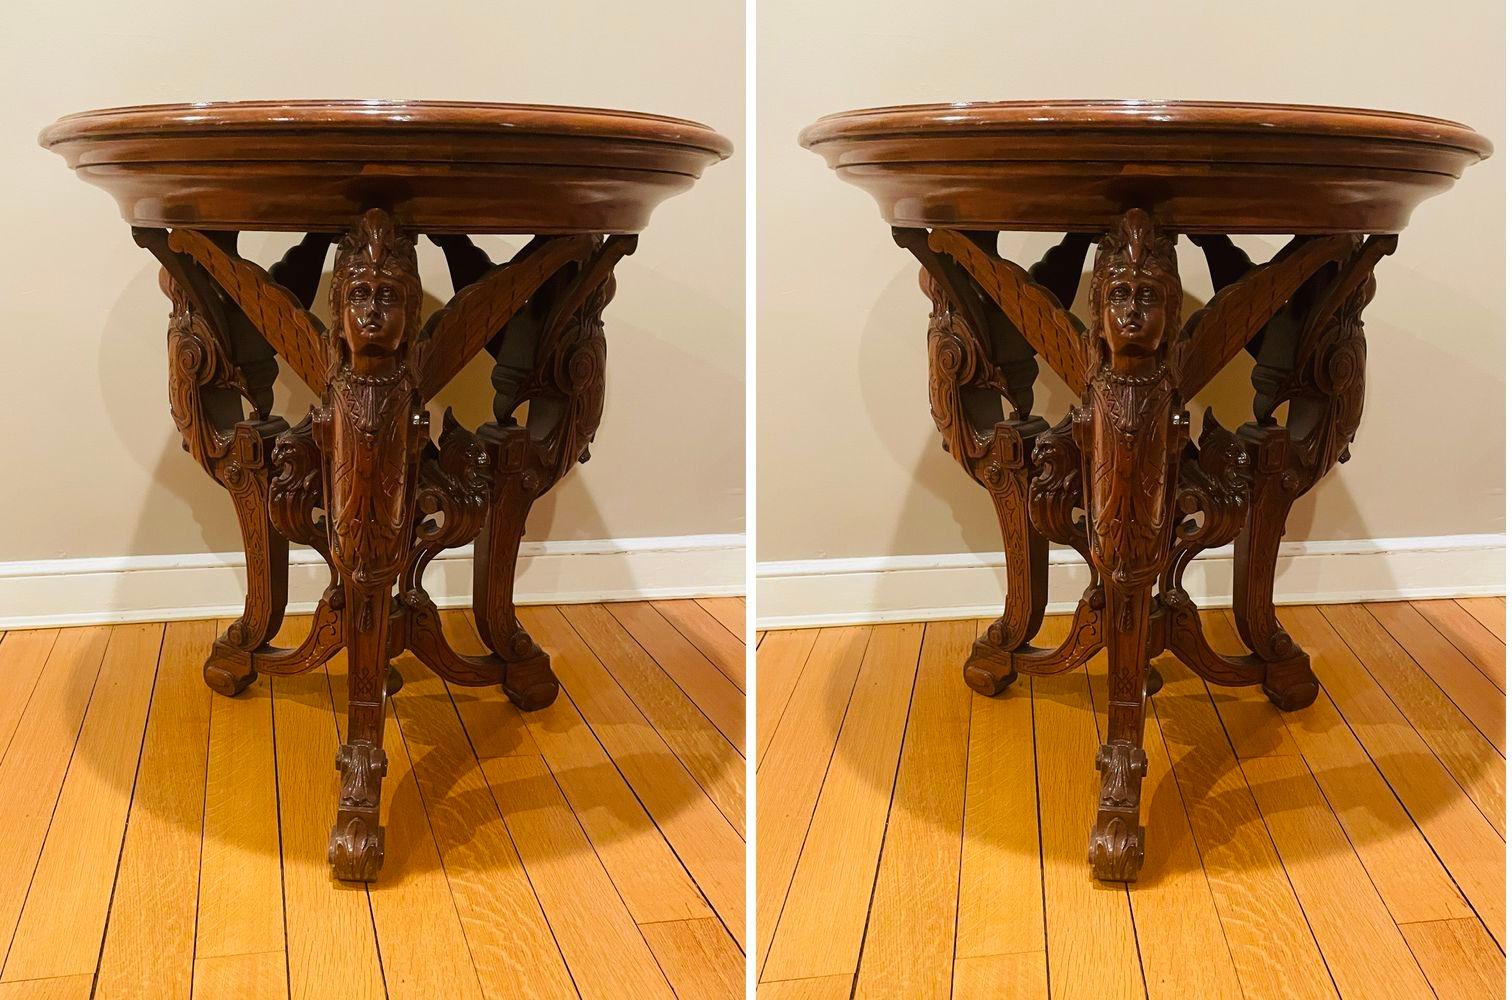 A Rare Pair of R.J. Horner End Tables, Side Tables or Pedestals
This stunning rare pair of end or side tables is simply magnificent. The one of a kind pair having finely inlaid table tops depicting a center star with inlaid stars flanking a central